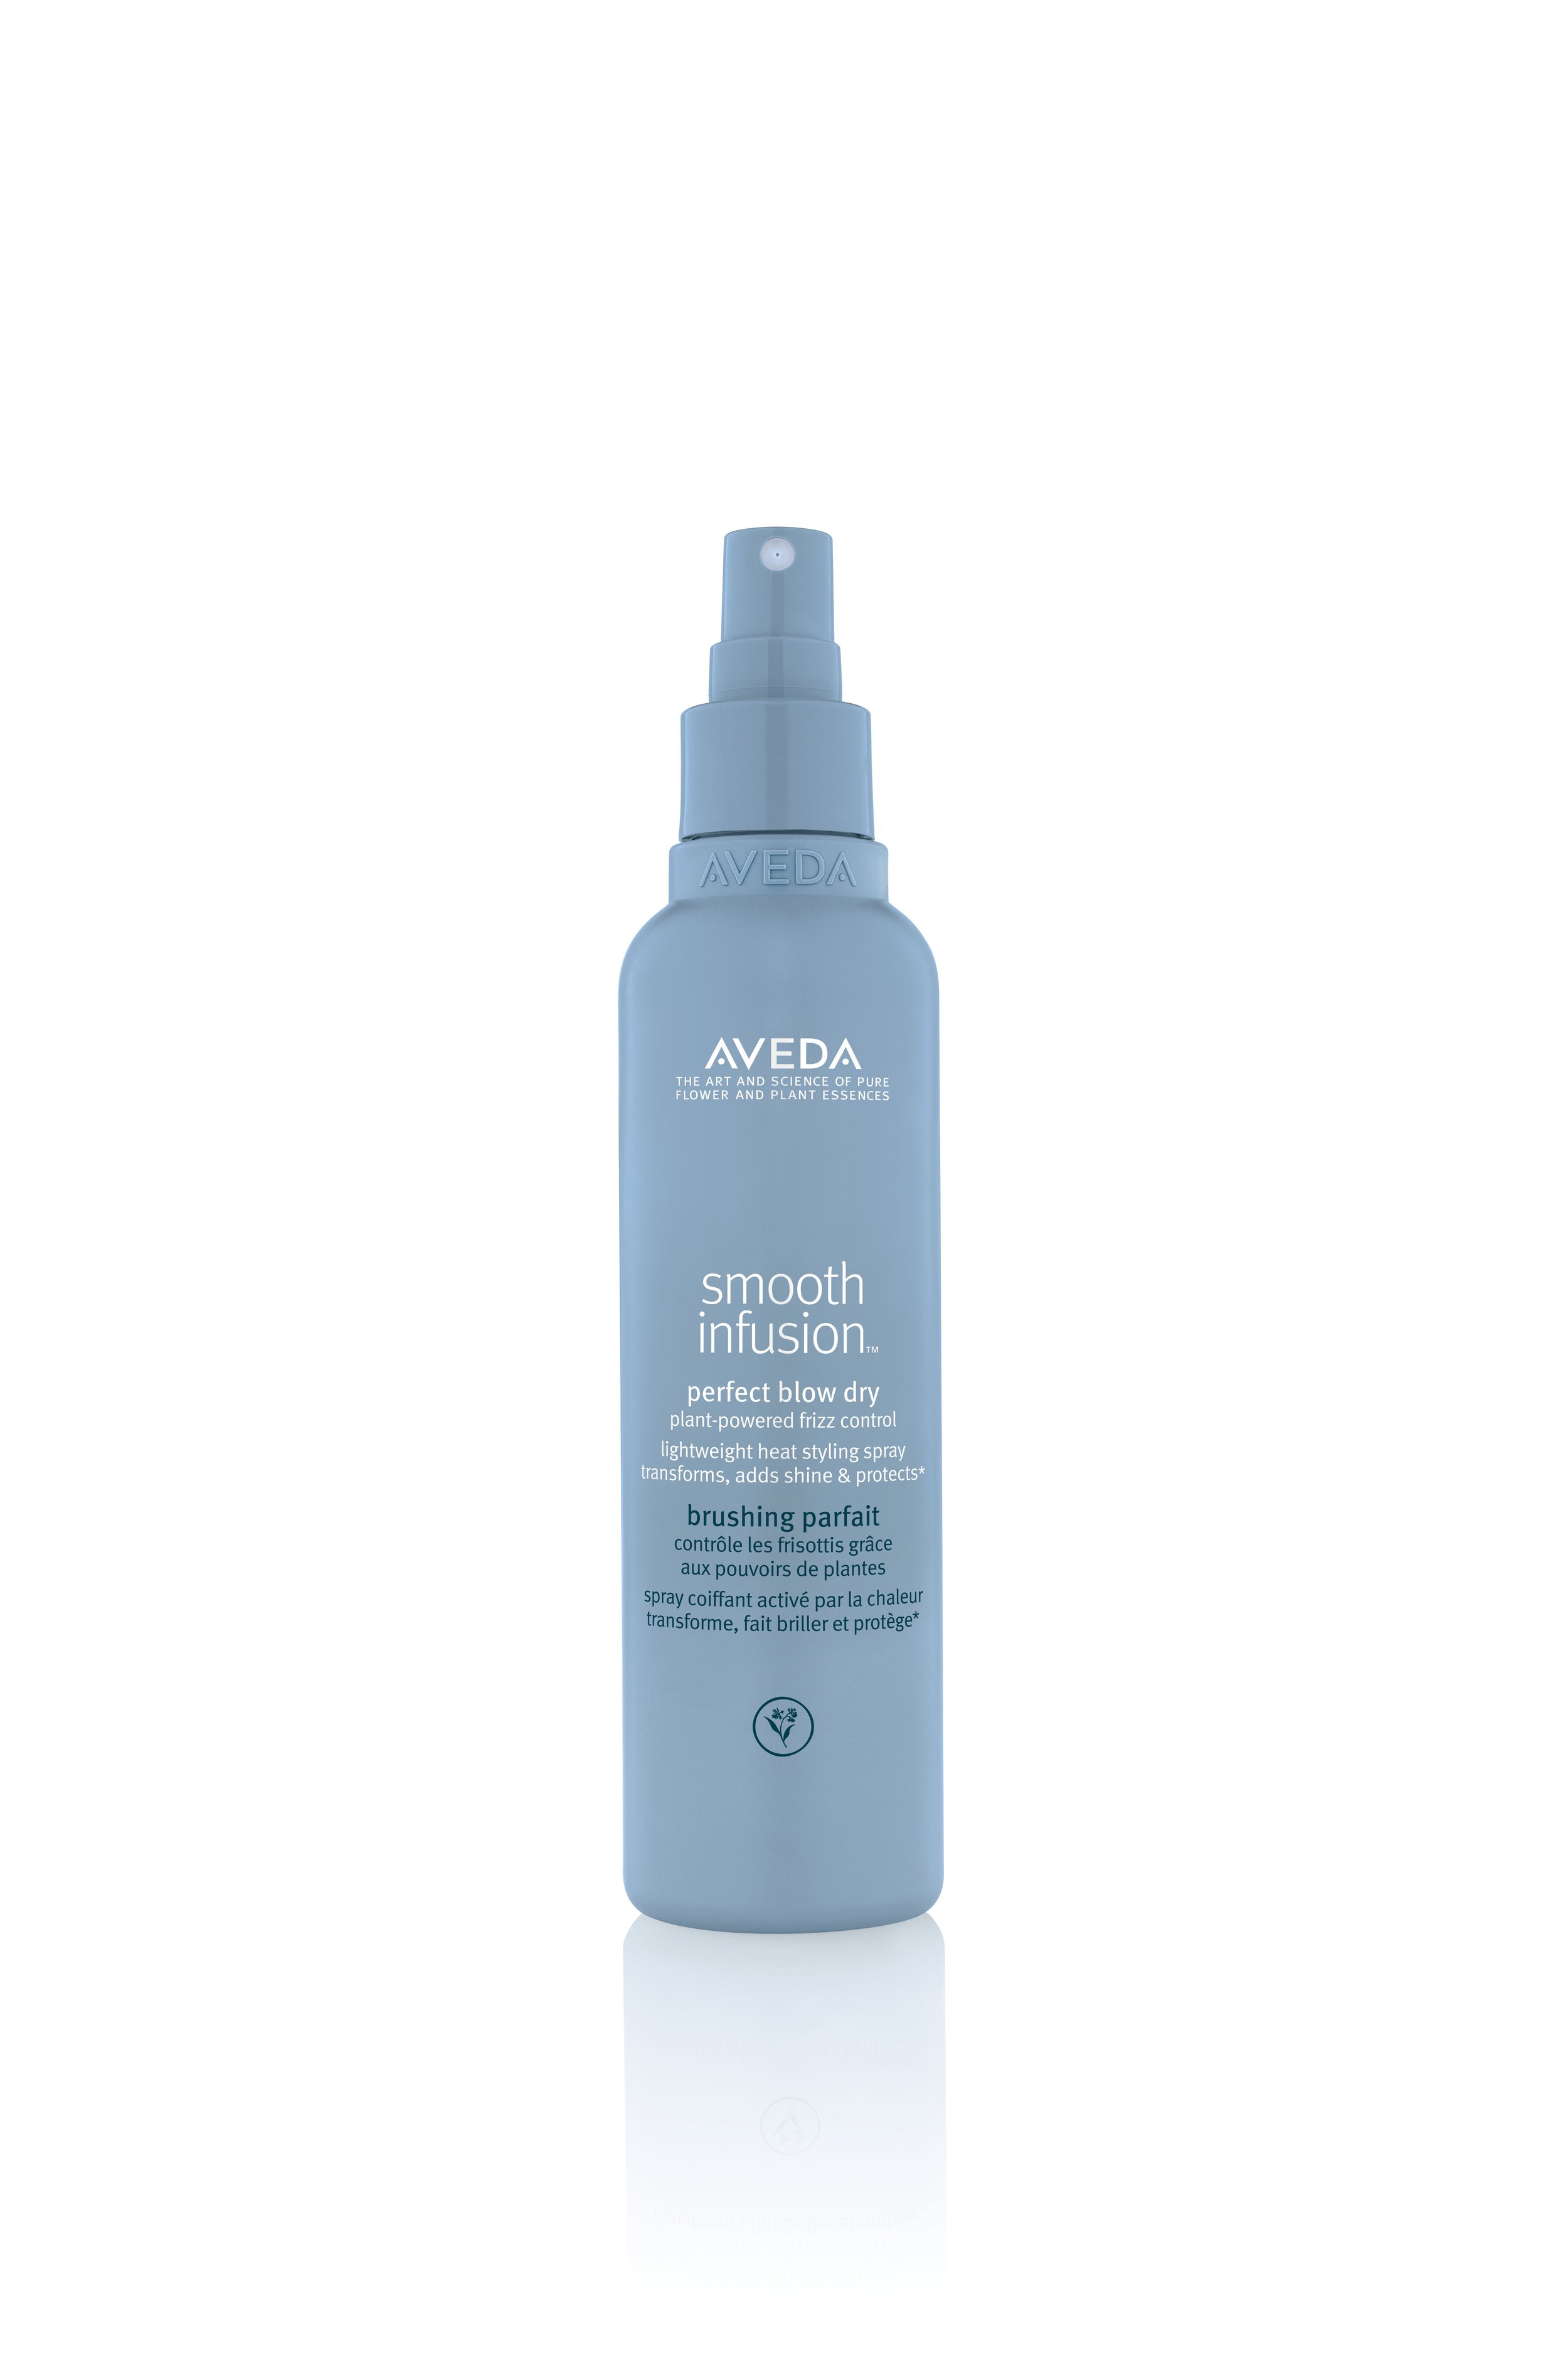 1. Aveda Smooth Infusion™ Range from €28